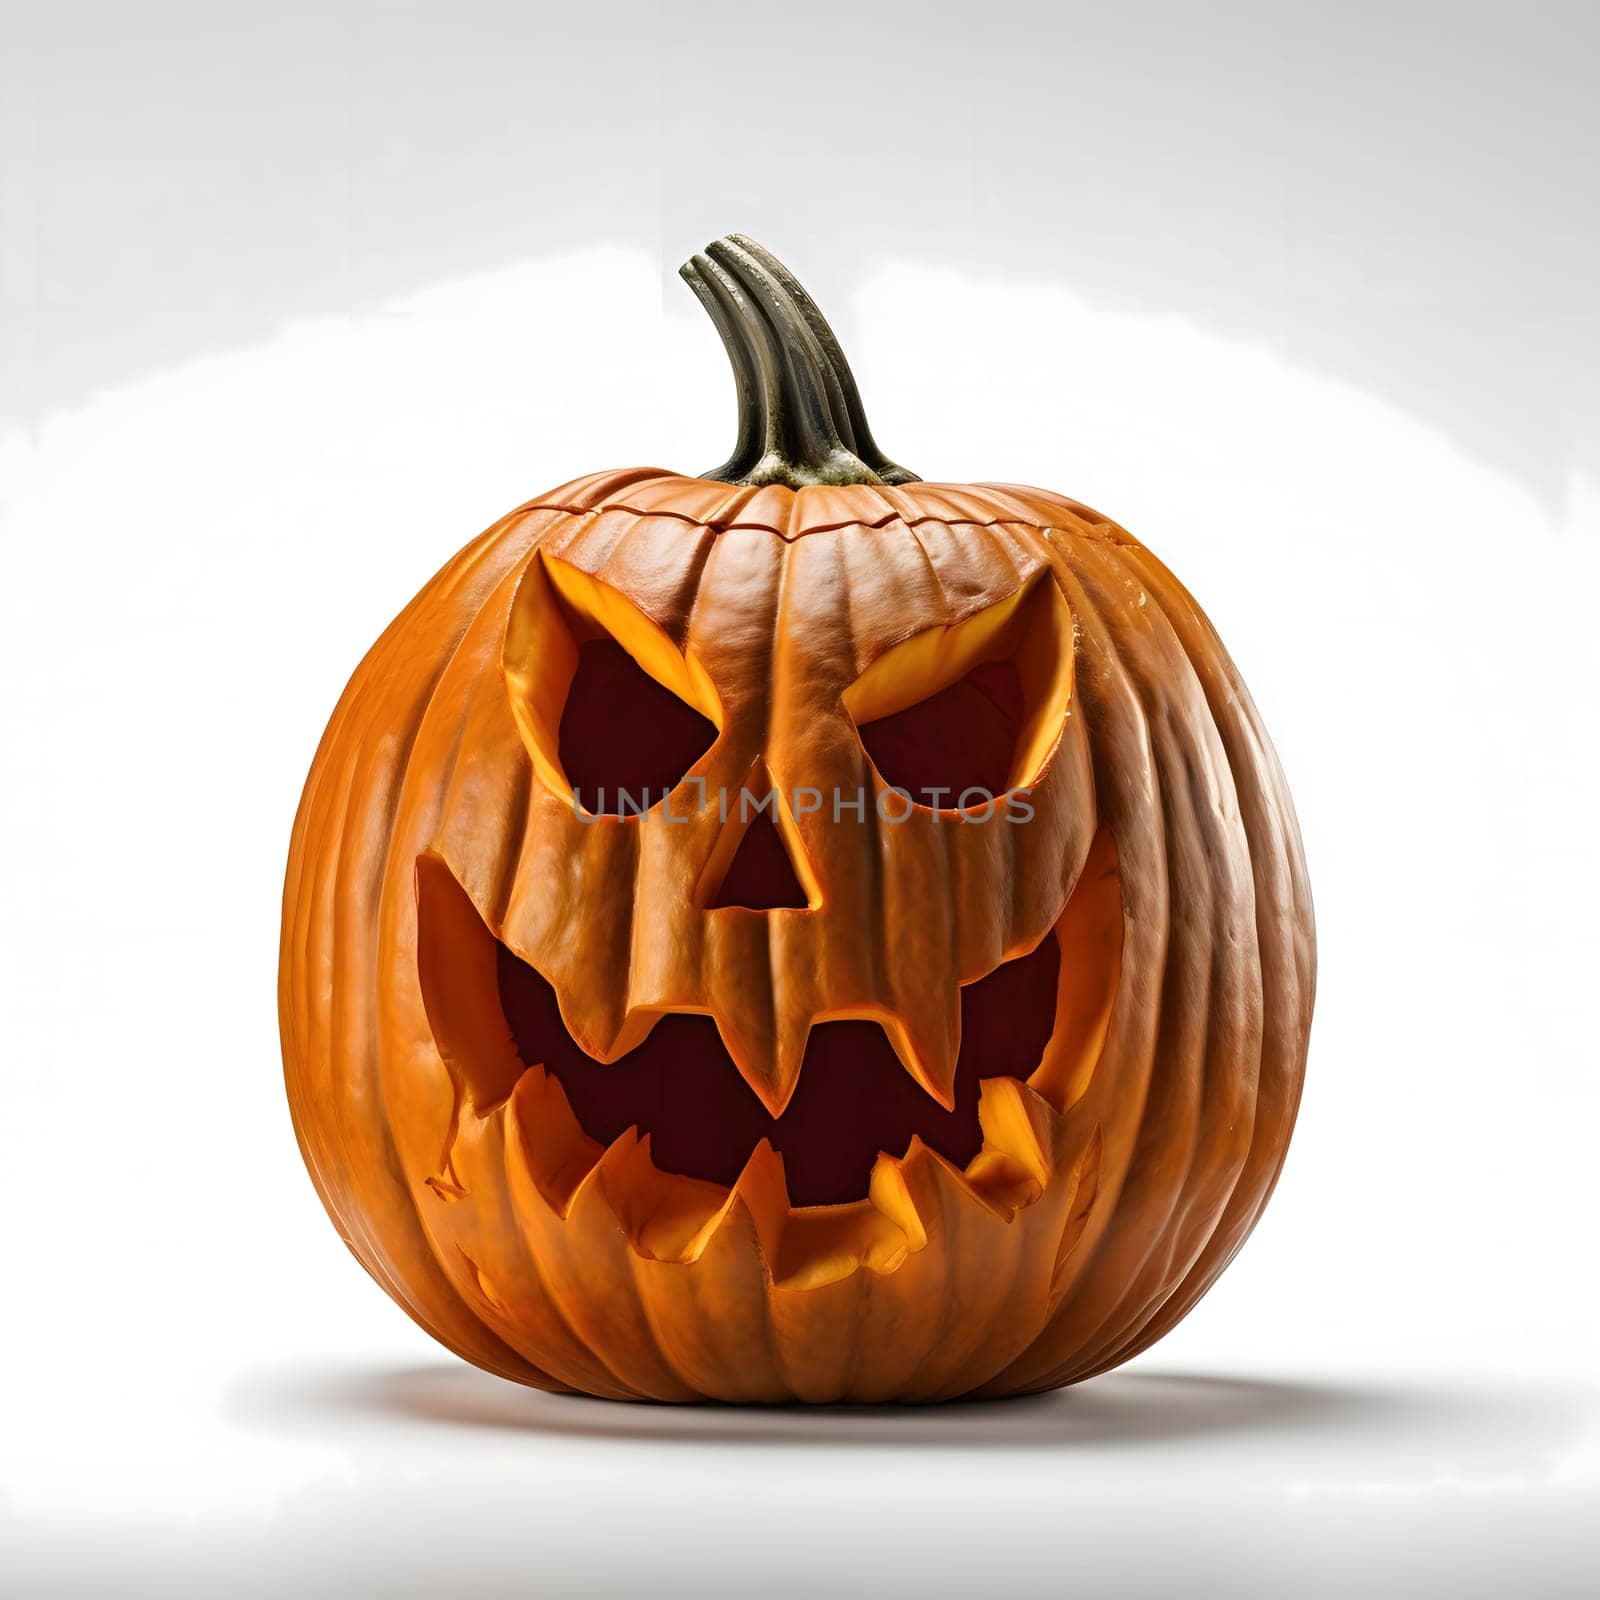 Jack-o-lantern pumpkin, Halloween image on a white isolated background. by ThemesS